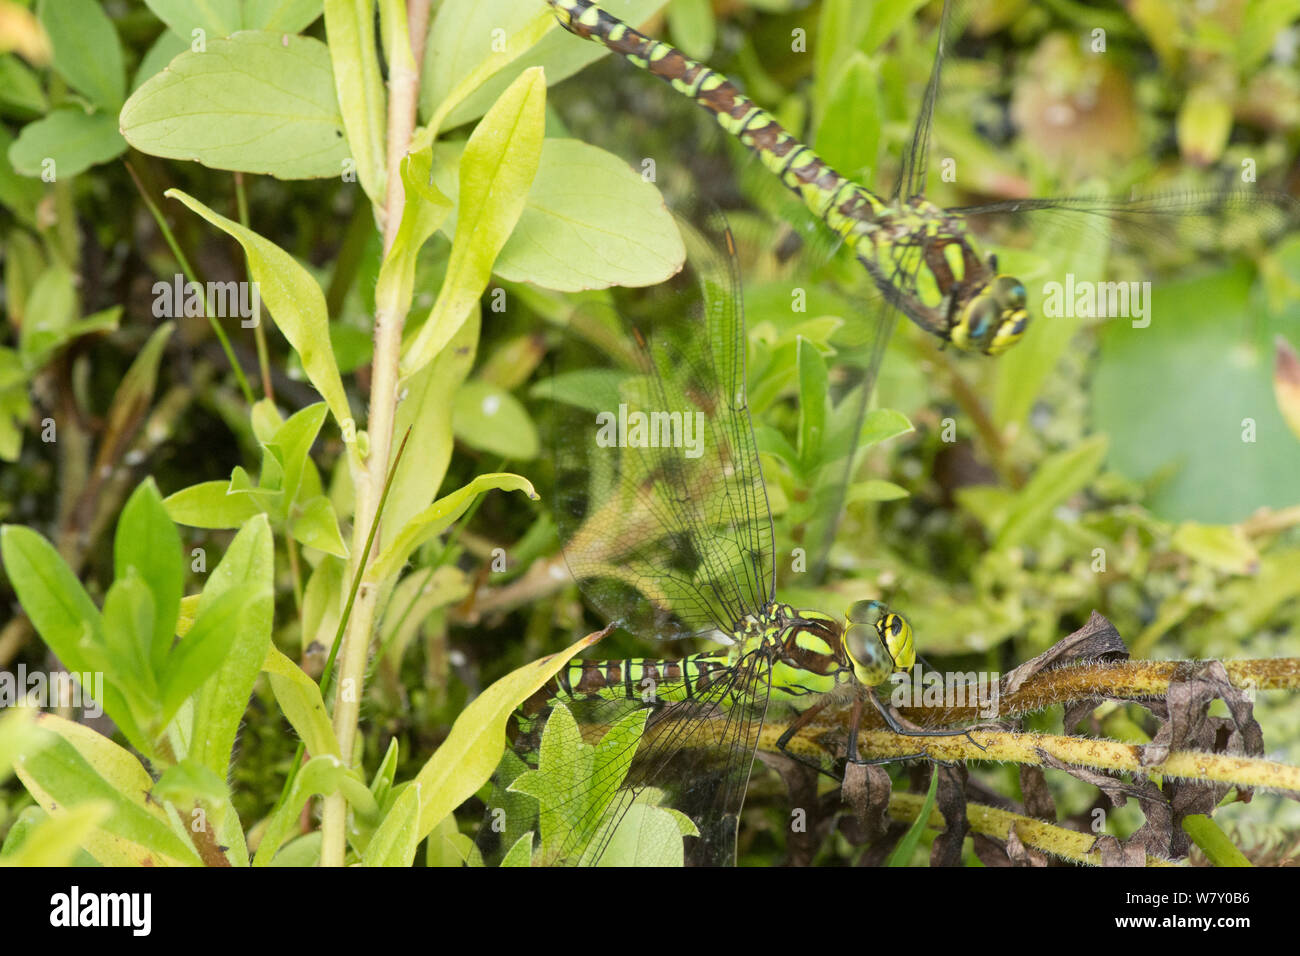 Two dragonflies together laying eggs, one flying, ovipositing,Southern Hawker, Aeshna cyanea, injecting eggs into stem of Water Forget-me-not. Stock Photo